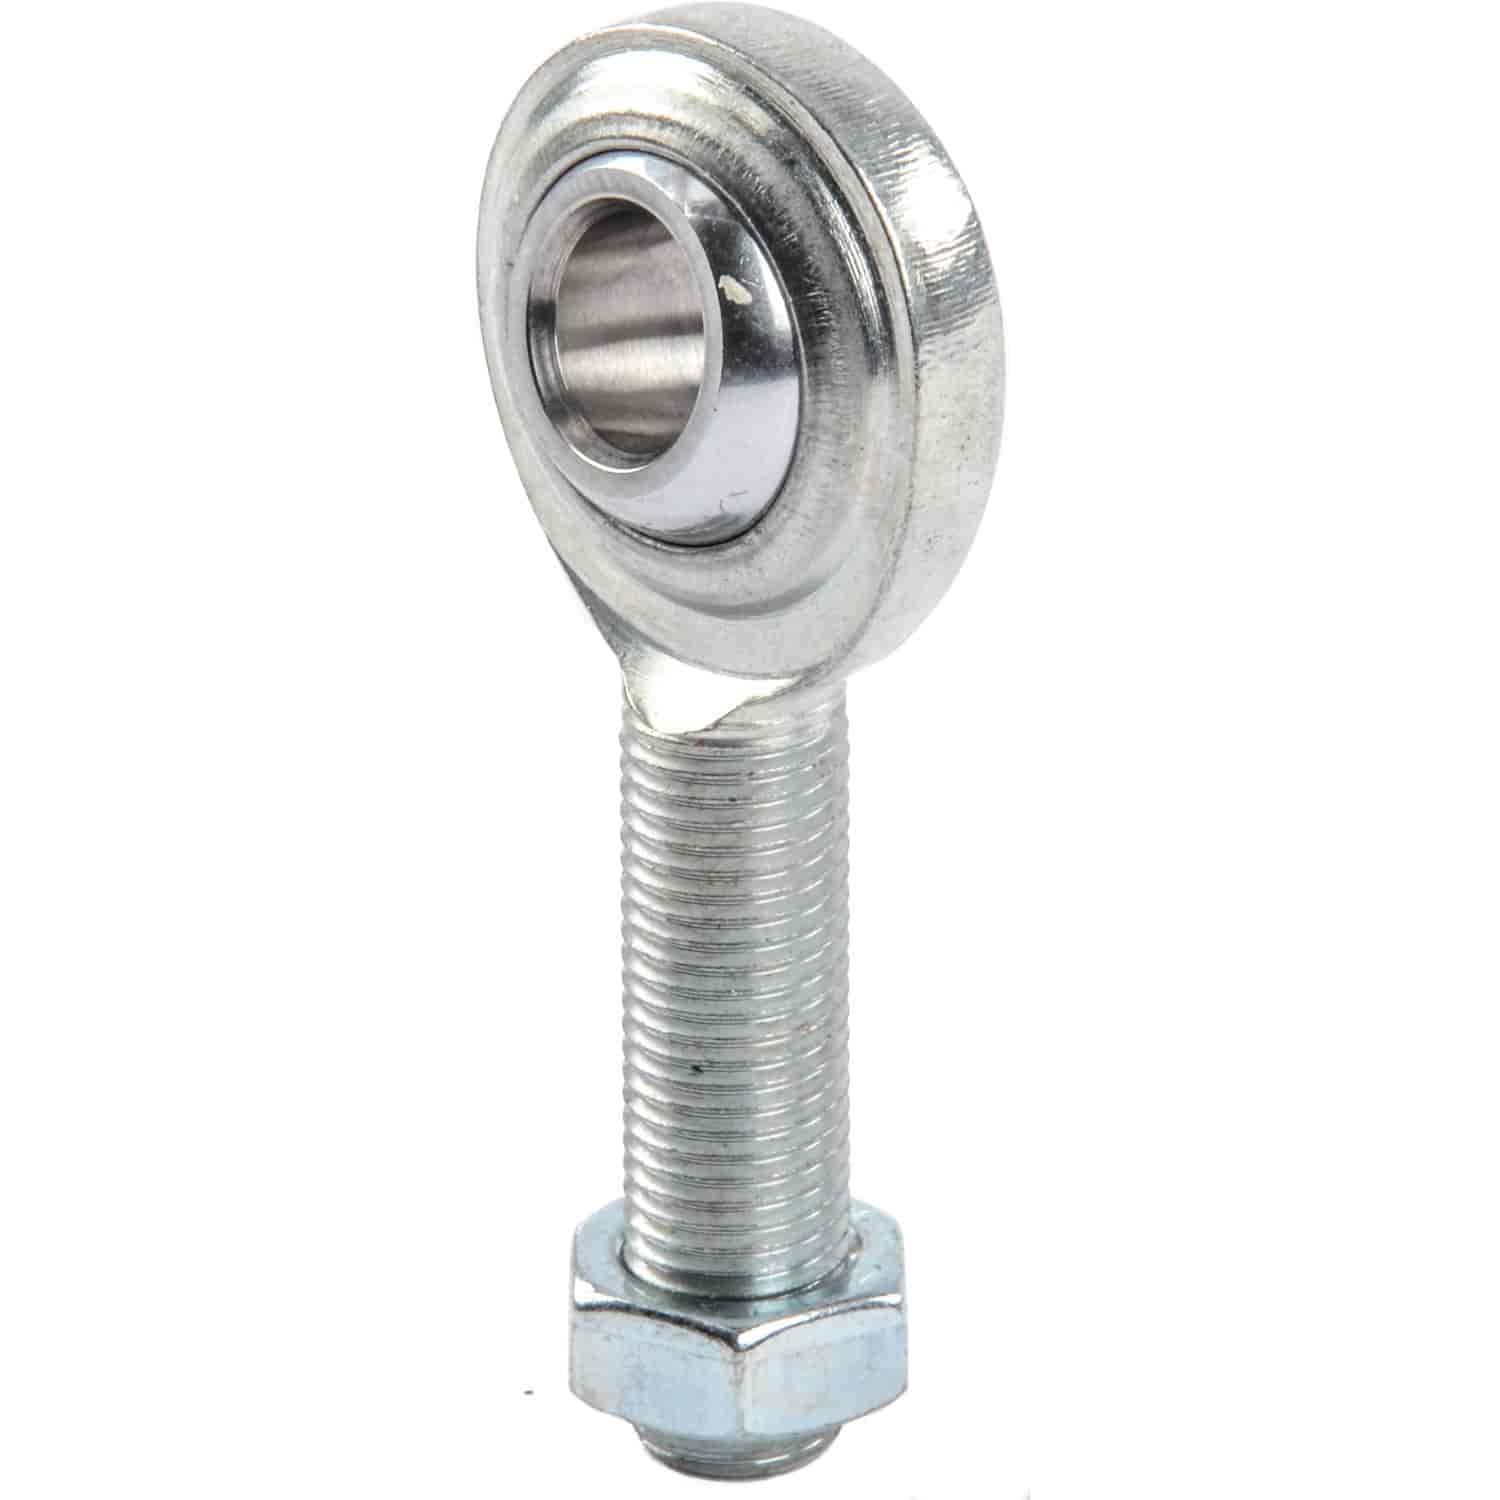 Two-Piece Rod End with Jam Nut 3/8